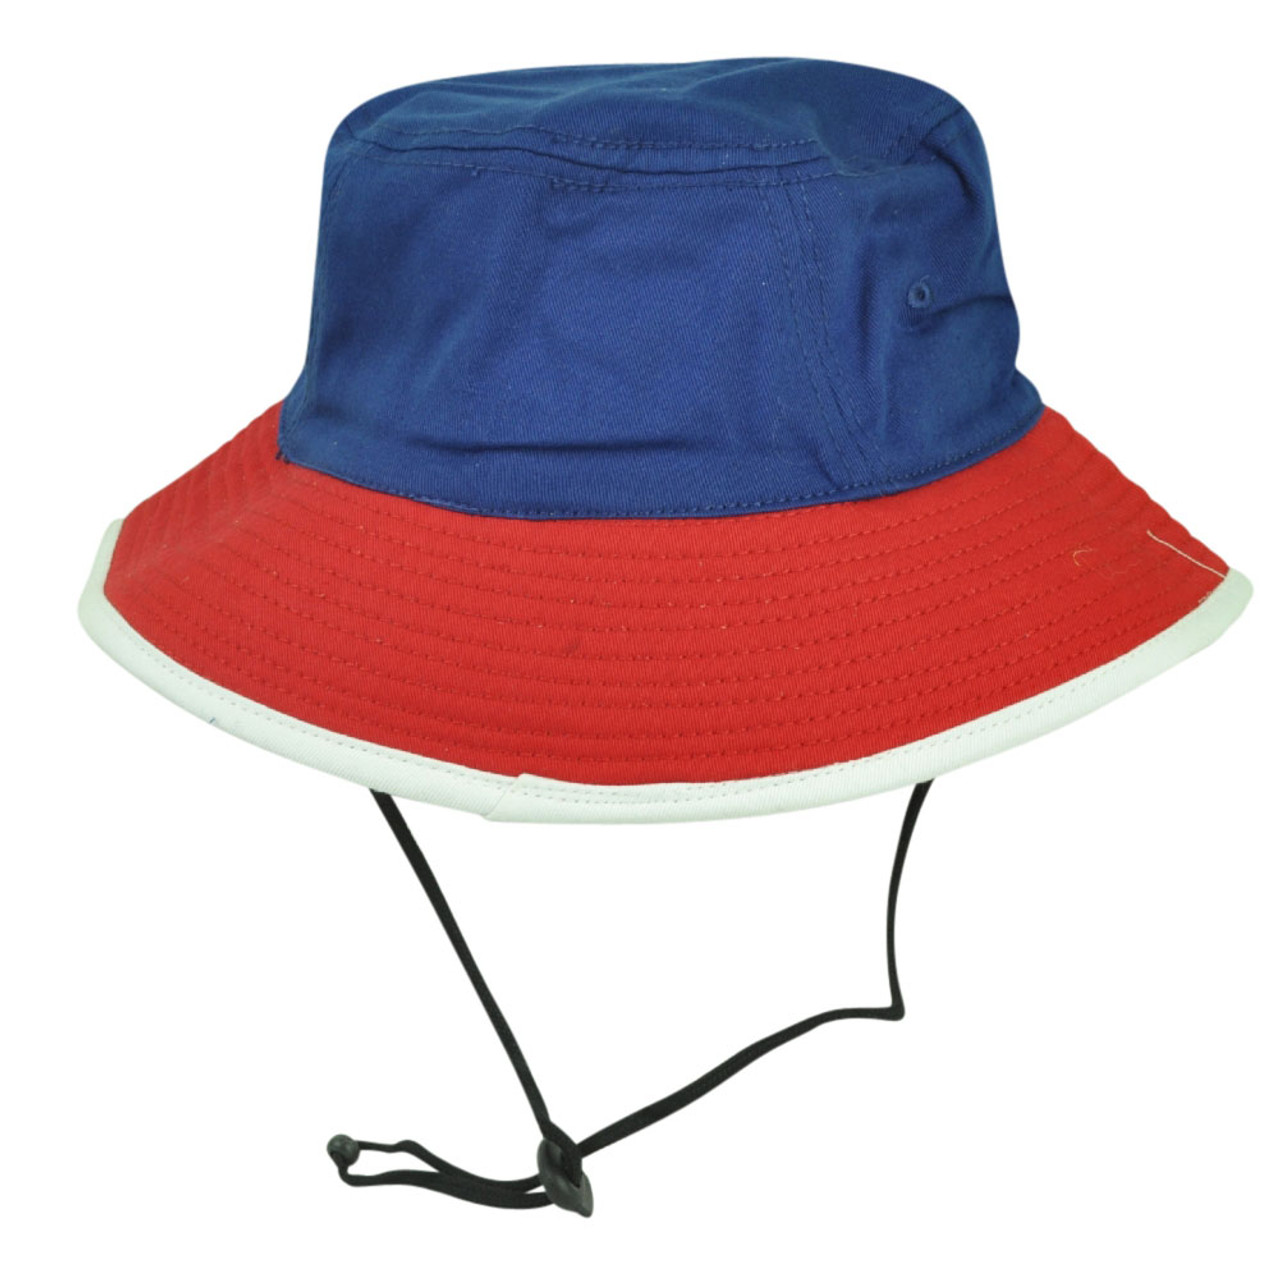 Blue Red Sun Bucket Crusher Fisherman Hat Blank Outdoors One Size 2 Tone  Outdoor - Cap Store Online.com